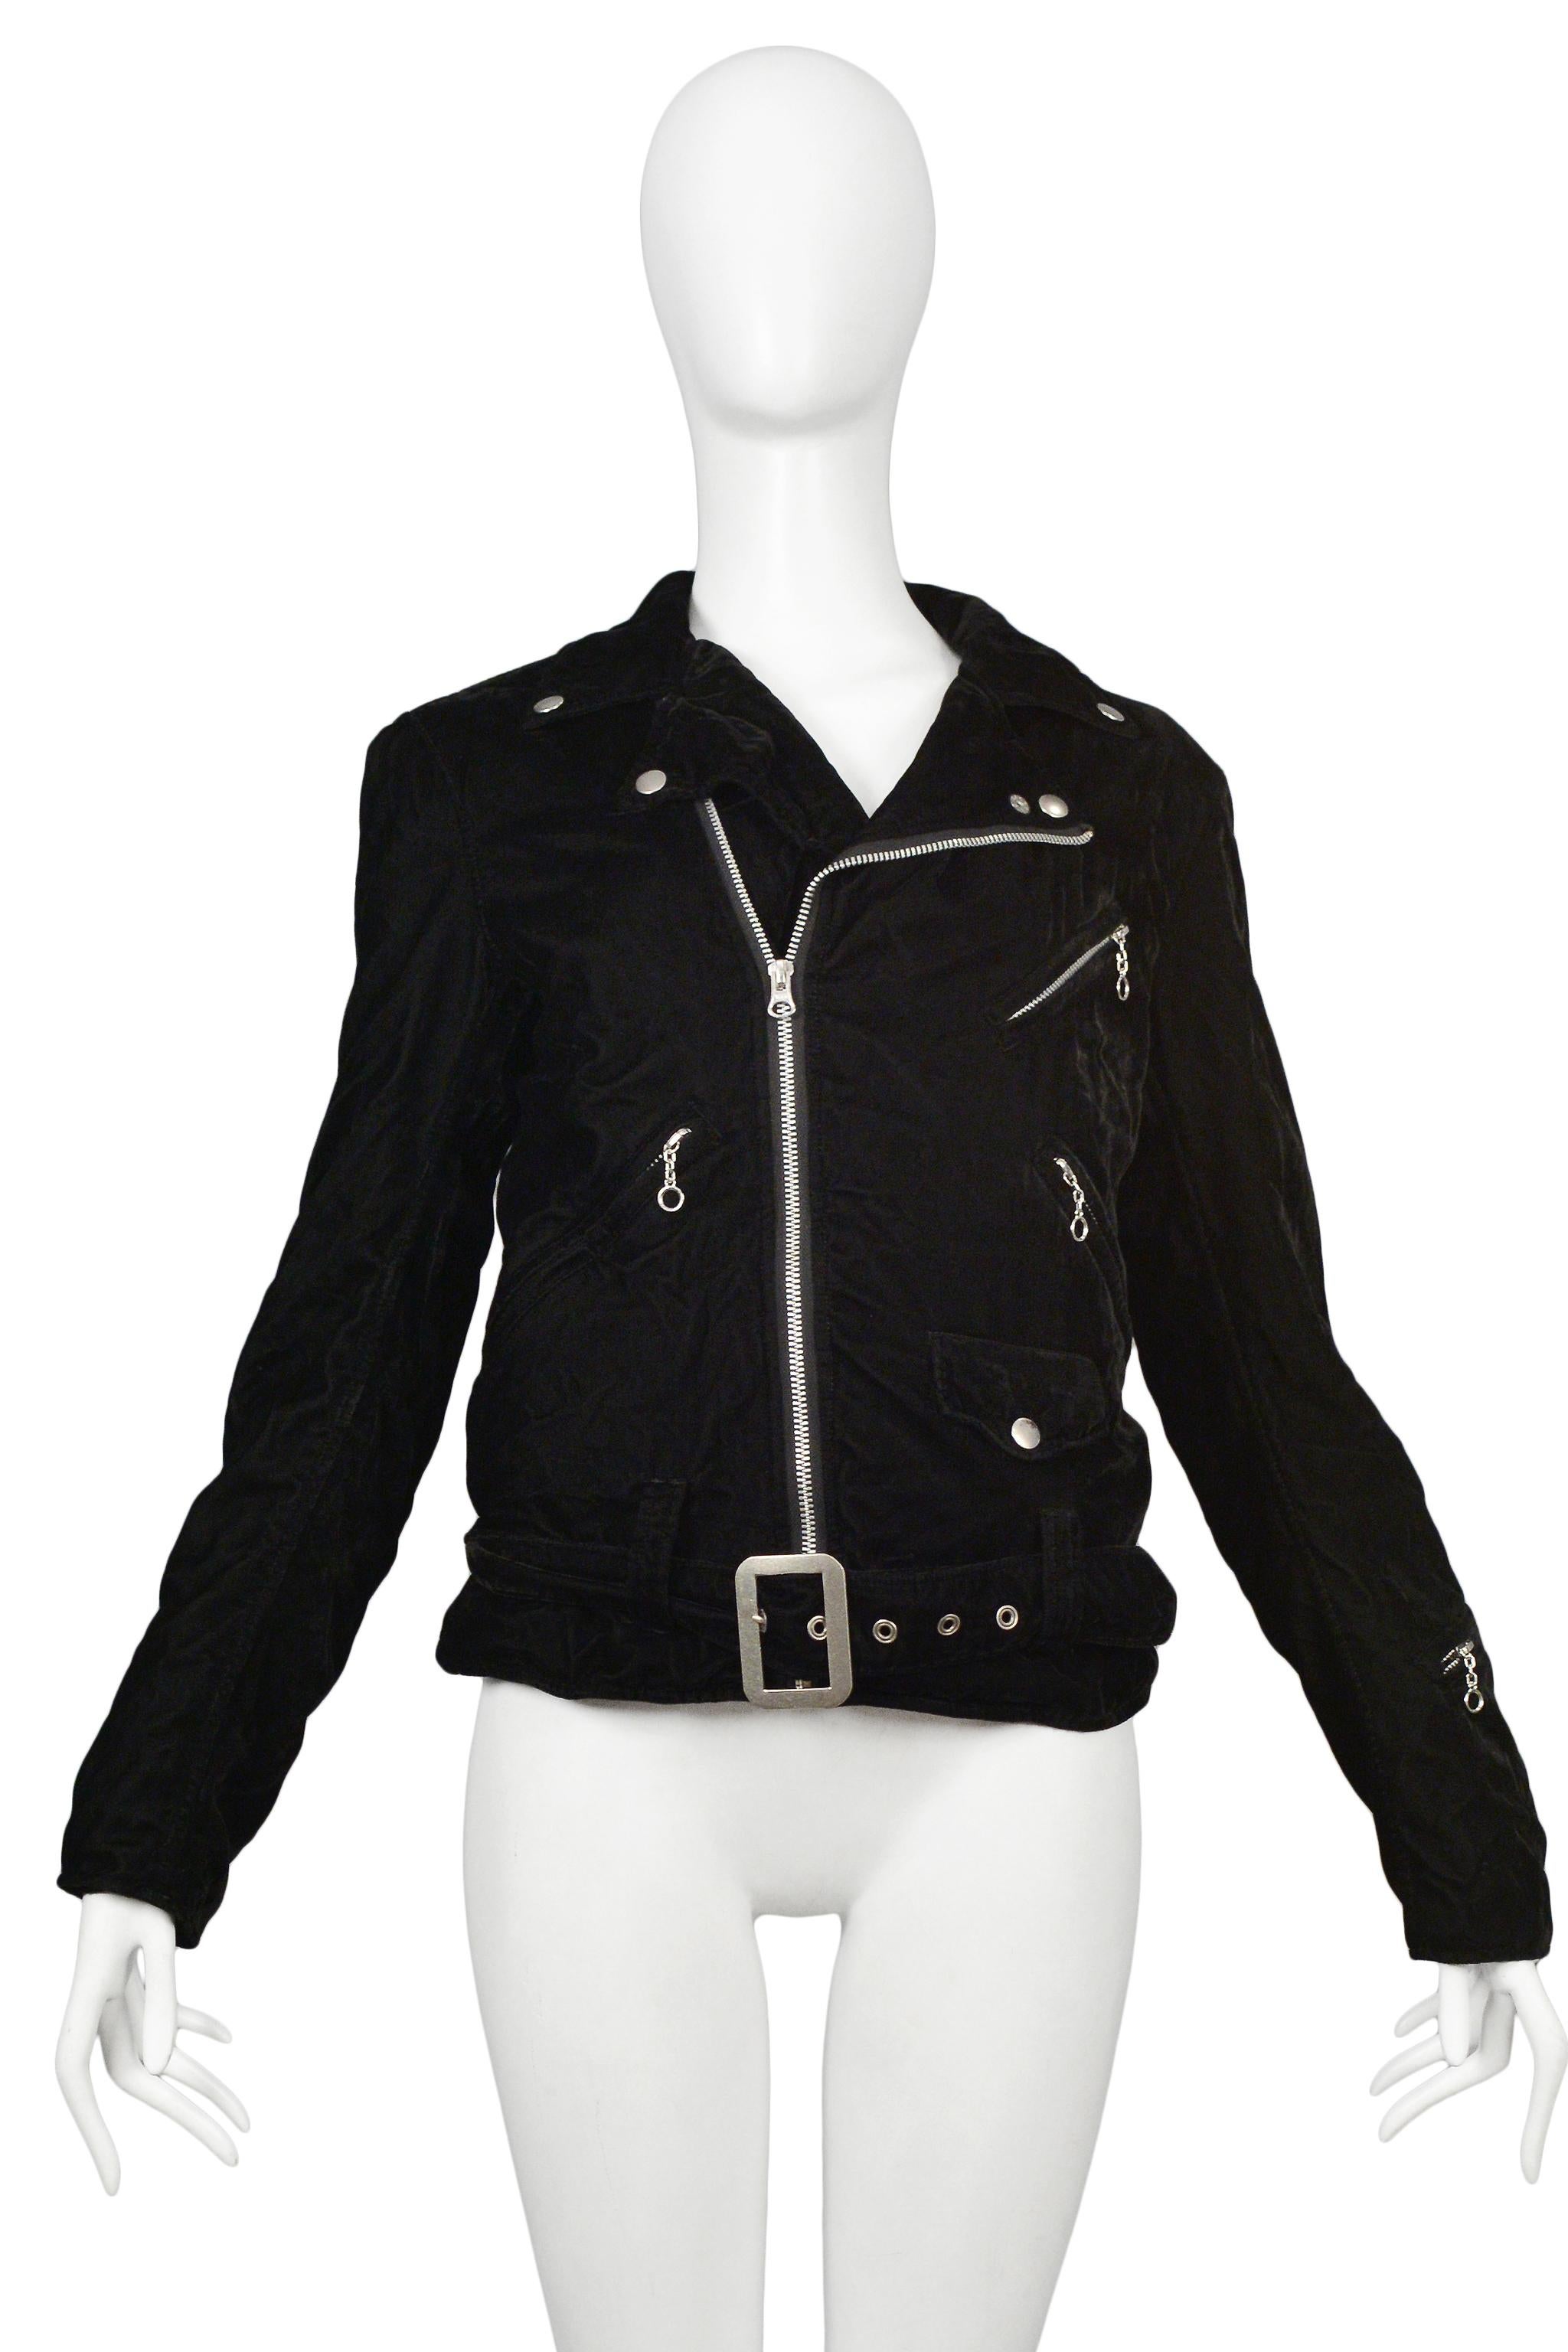 Resurrection Vintage is excited to offer a vintage Junya Watanabe for Comme des Garcons black velvet motorcycle jacket featuring classic moto details, side pockets, a snap pocket, sleeve zippers, silver-tone zippers, snaps, grommets, and belt